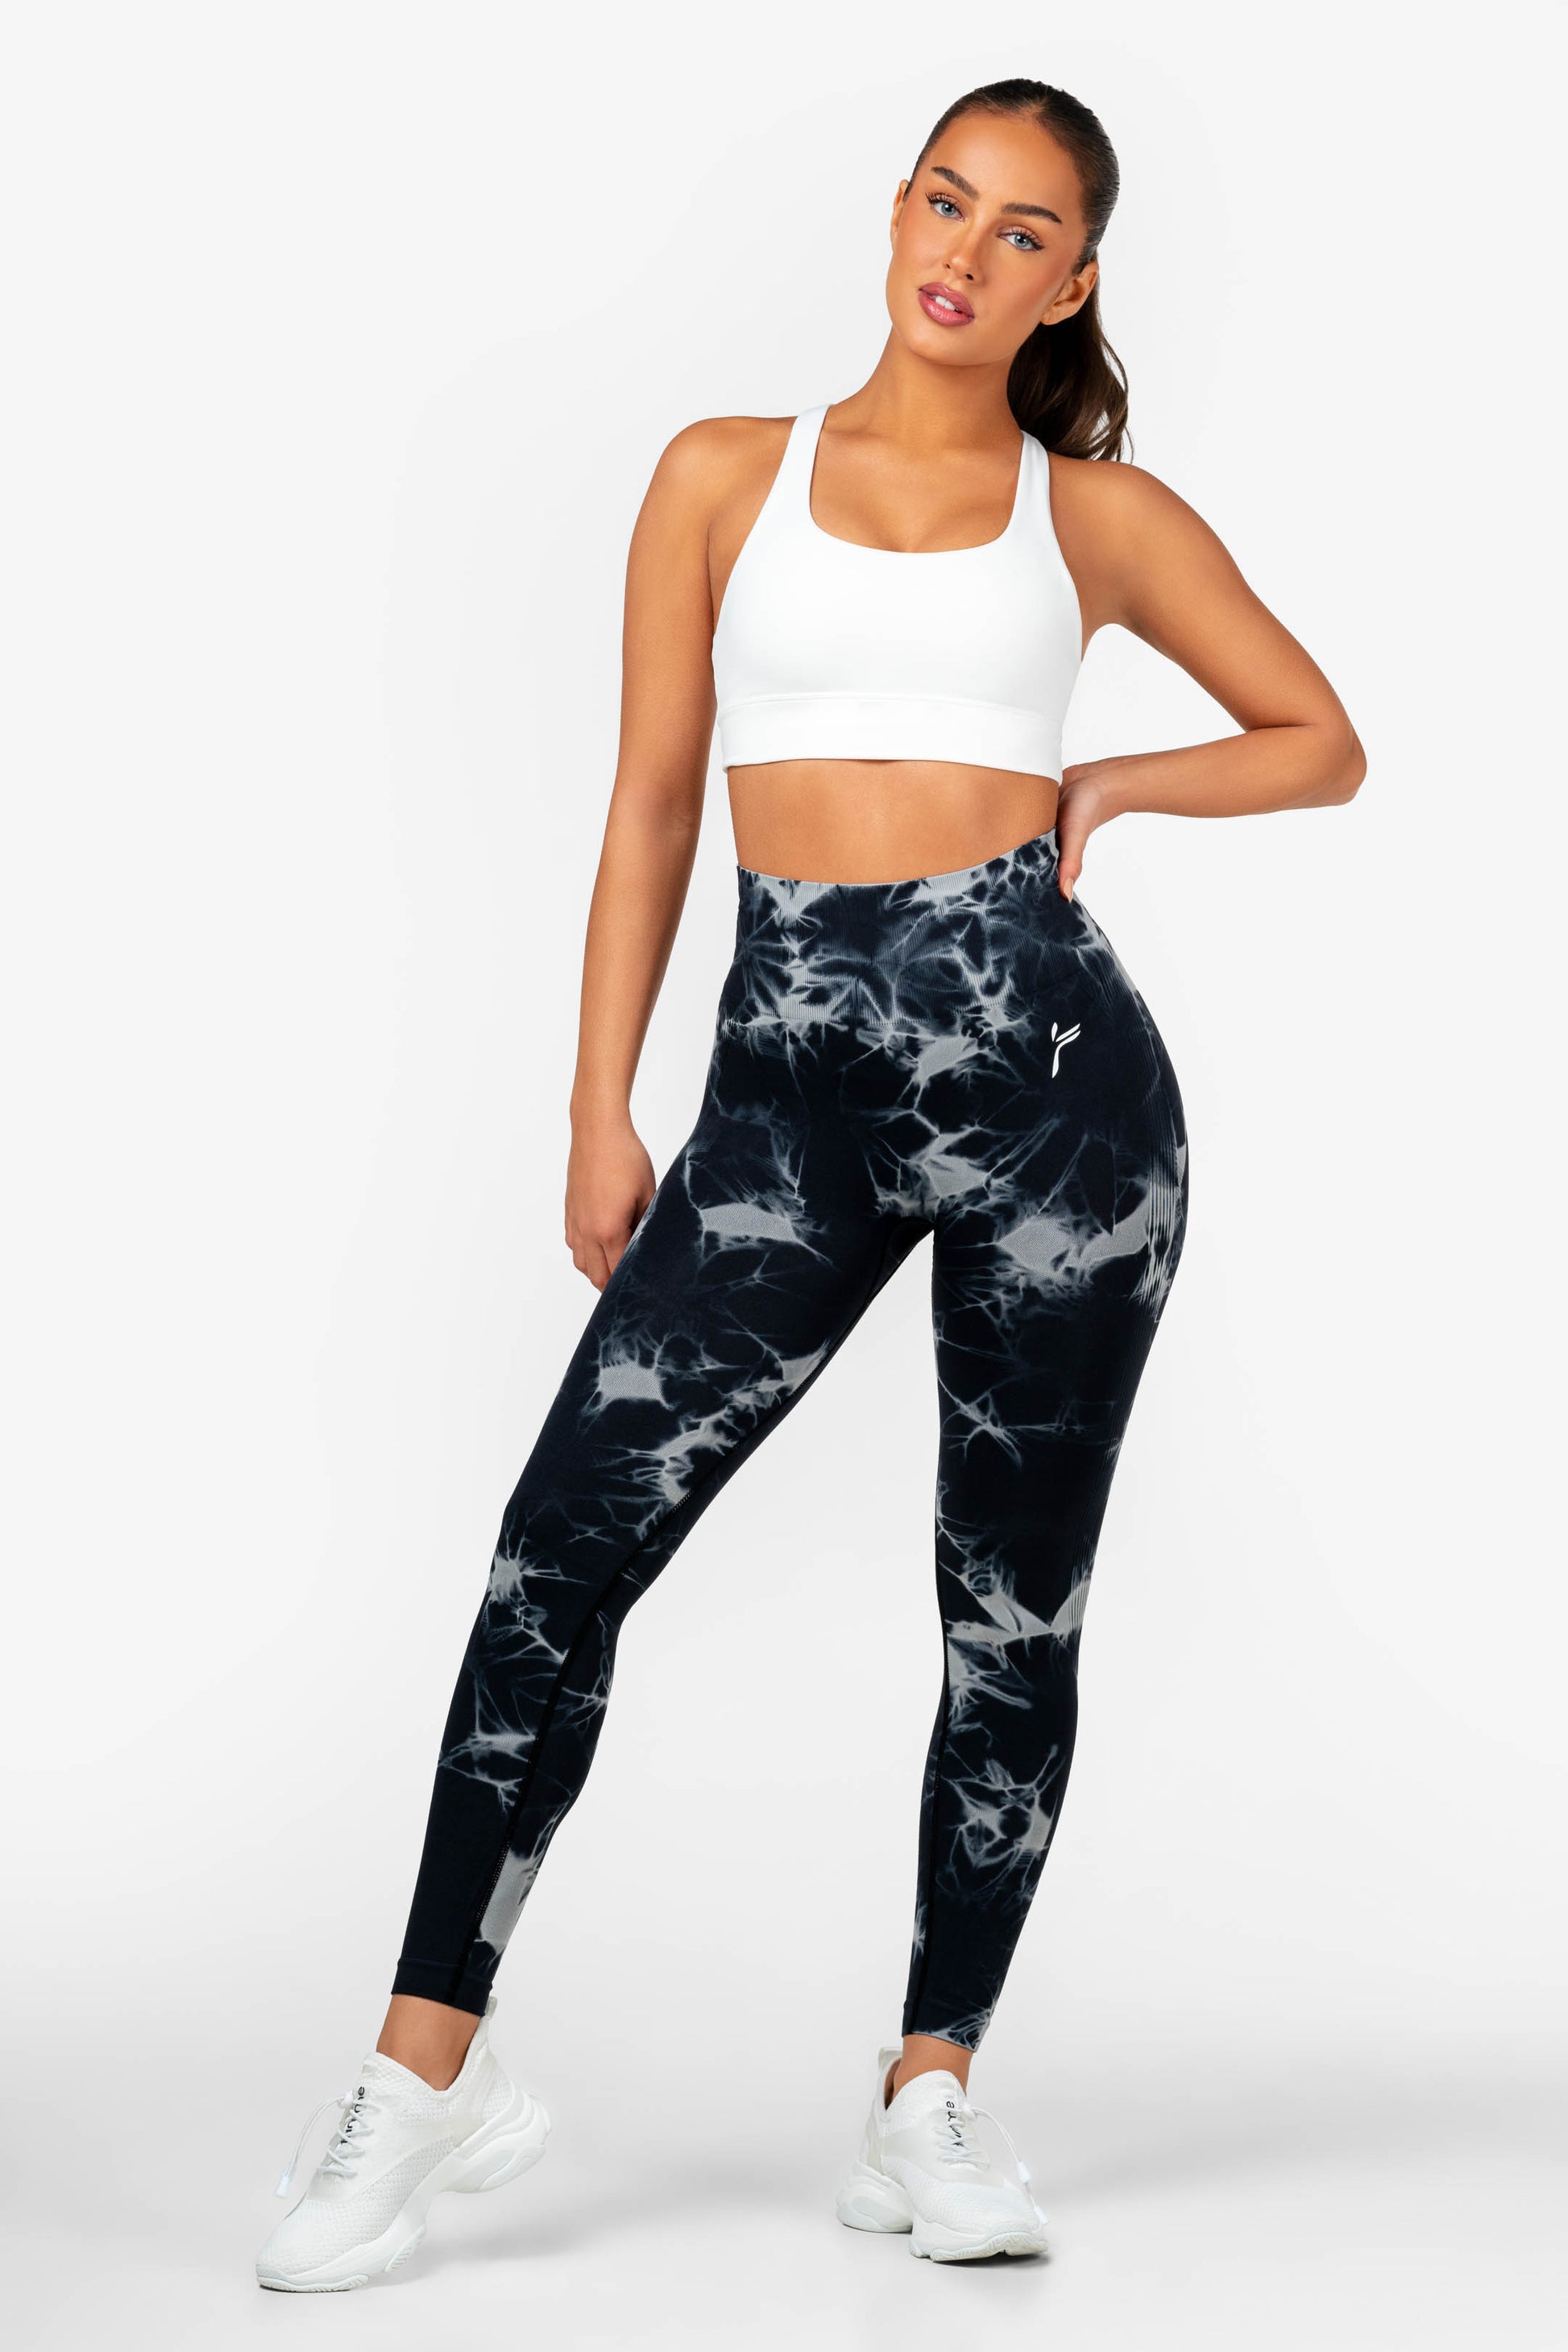  YIXISM Seamless Tie Dye Leggings Women for Fitness Yoga Pants Push  Up Workout Sports Legging High Waist Tights Gym Ladies Clothing (Color :  Black, Size : S) : Clothing, Shoes & Jewelry